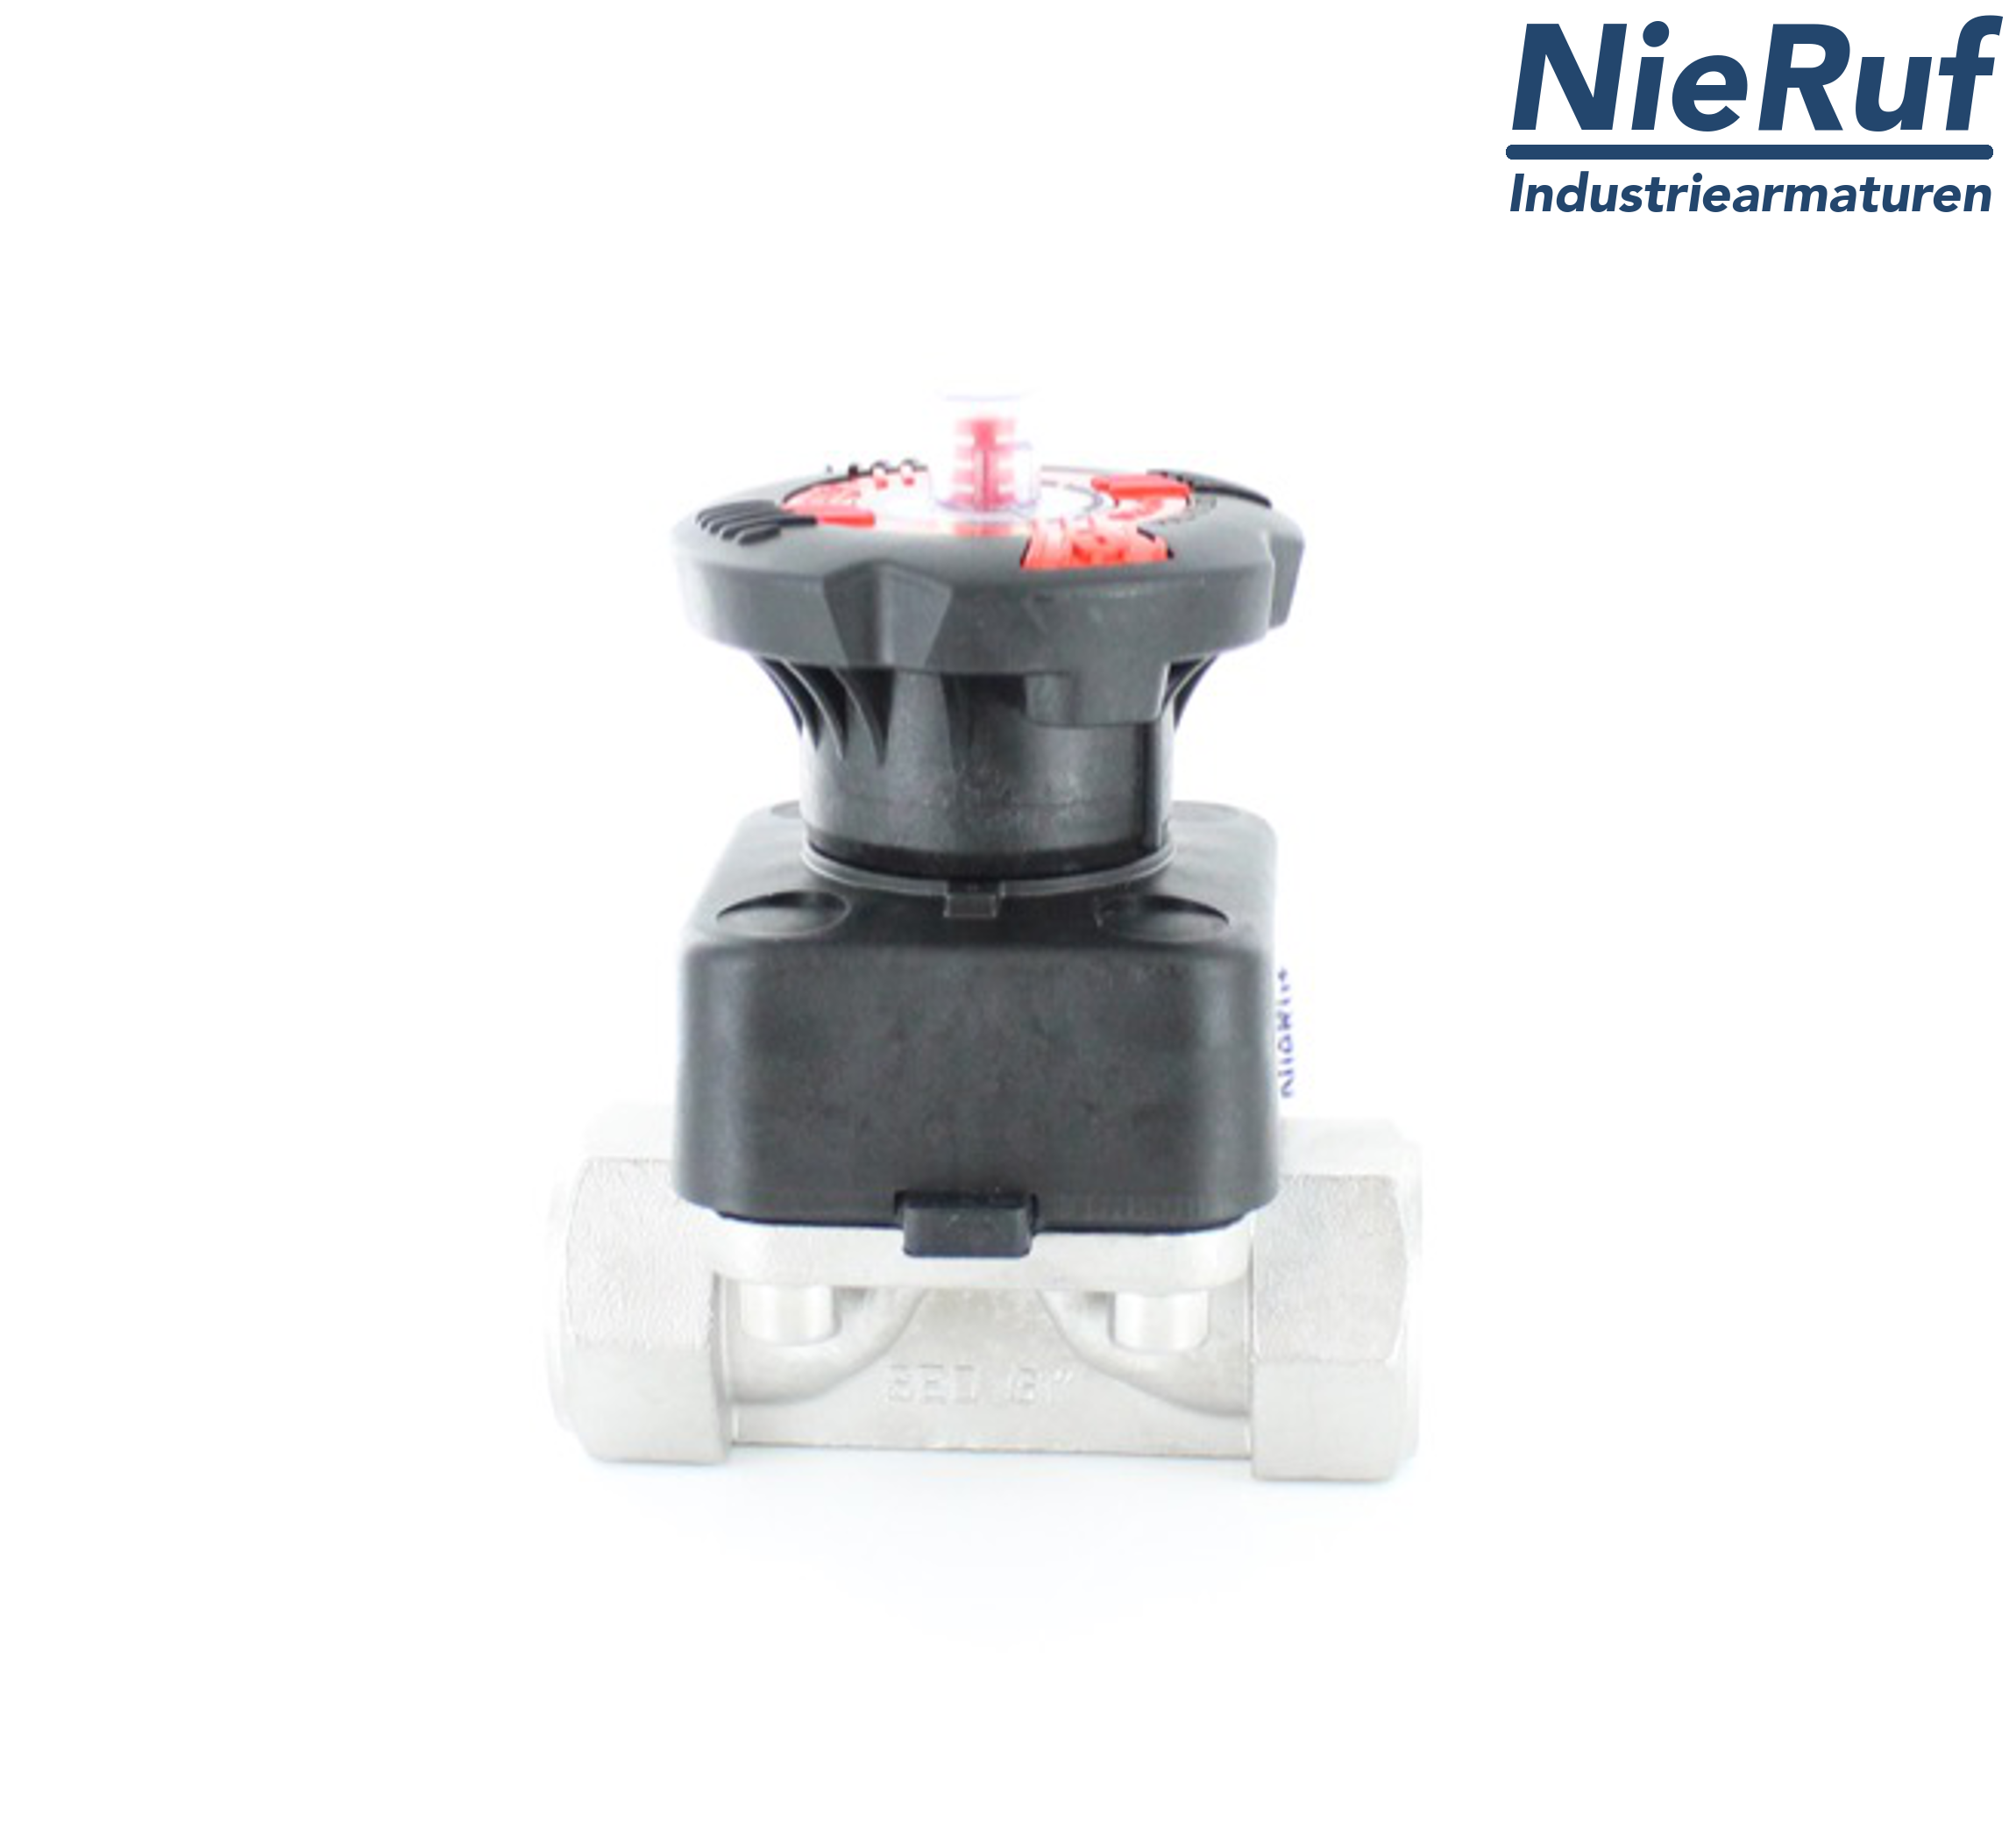 stainless steel-diaphragm valve 1/2 Inch membrane PTFE/EPDM two-piece female thread BSP